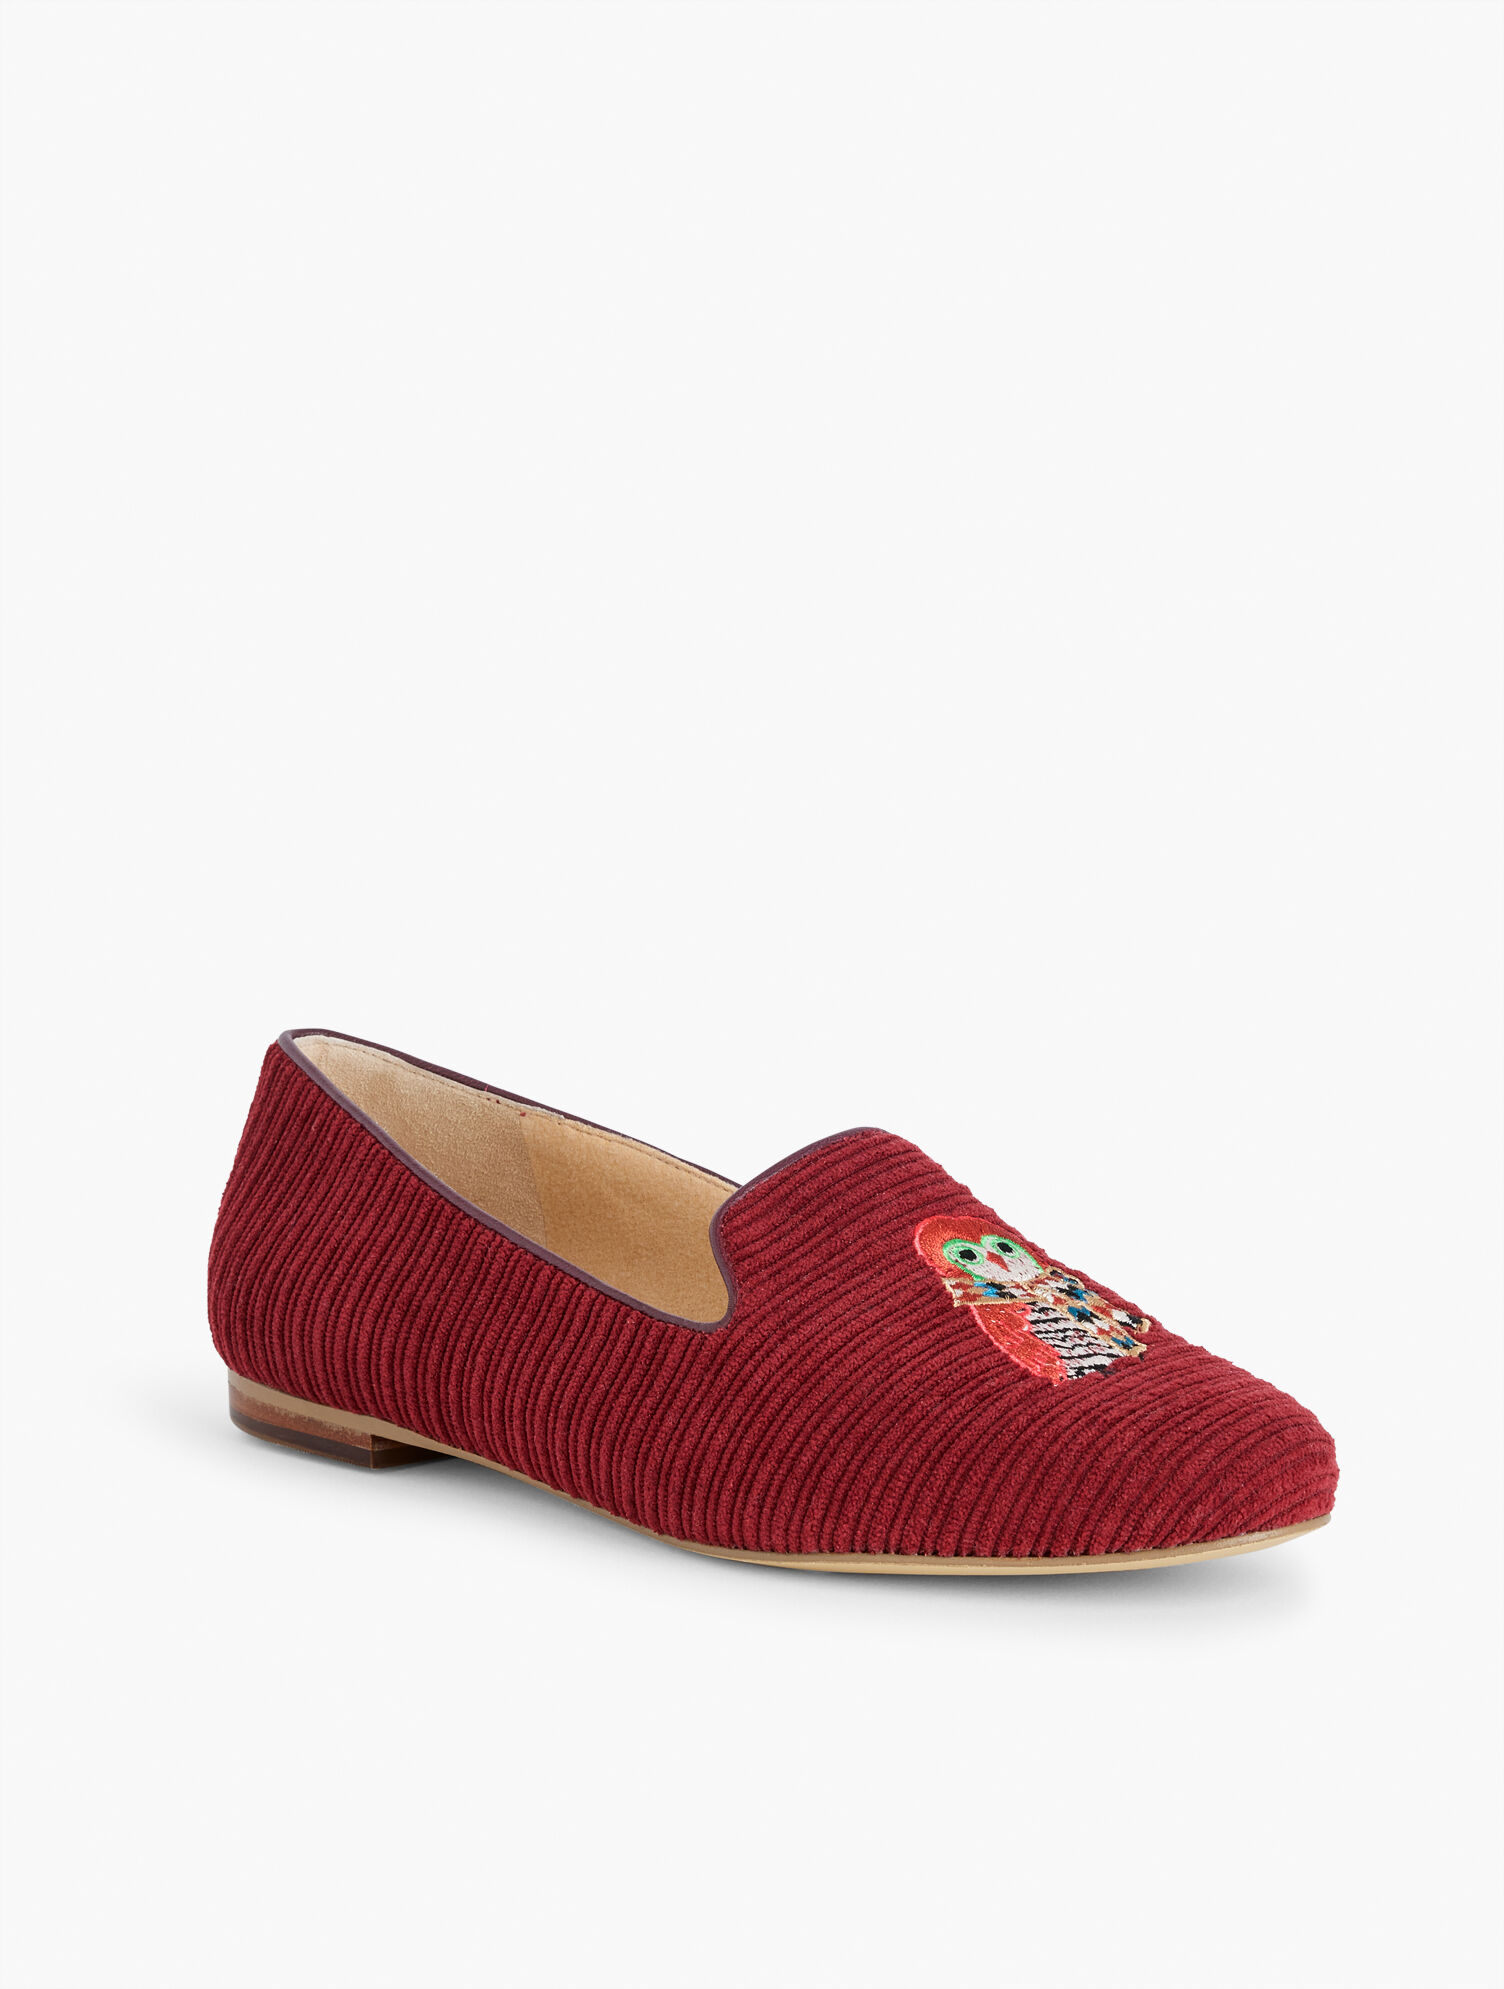 Ryan Corduroy Loafers - Embroidered Owl | Talbots